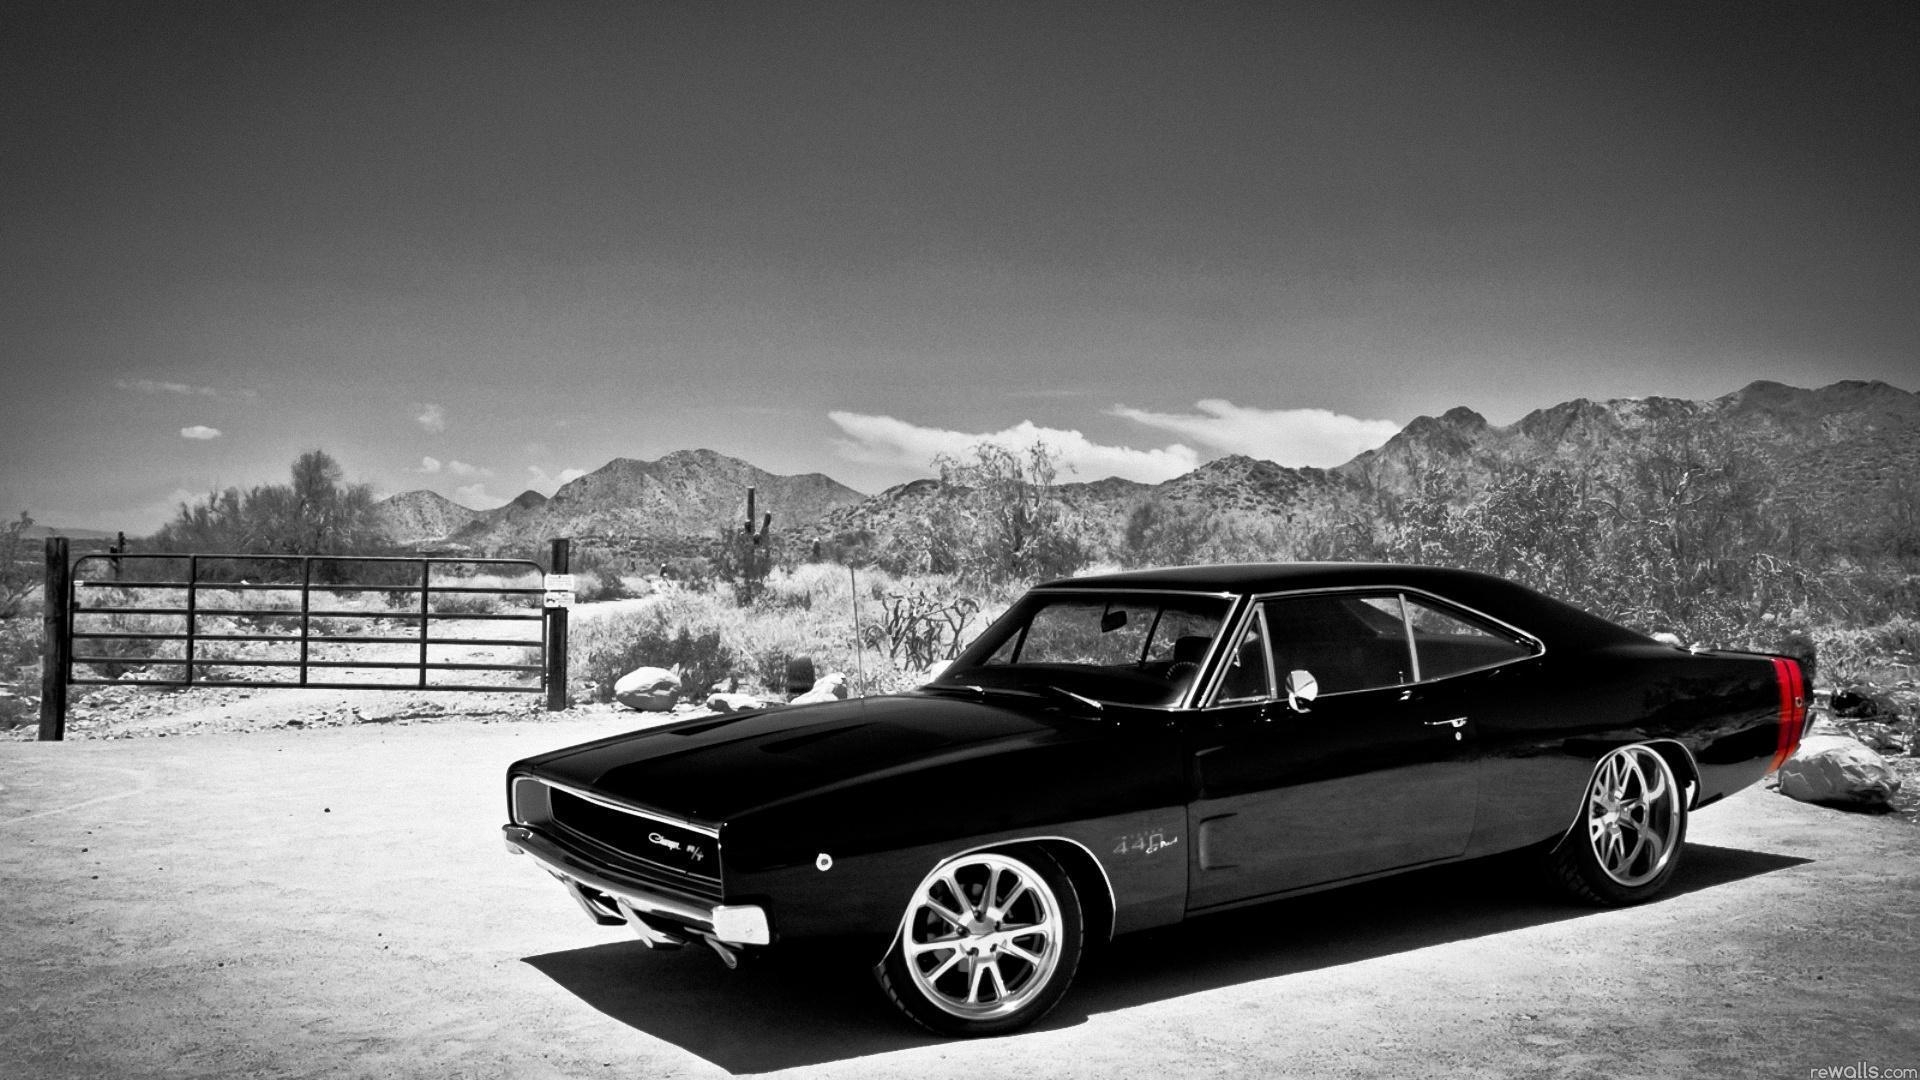 muscle cars hd wallpapers - wallpaper cave